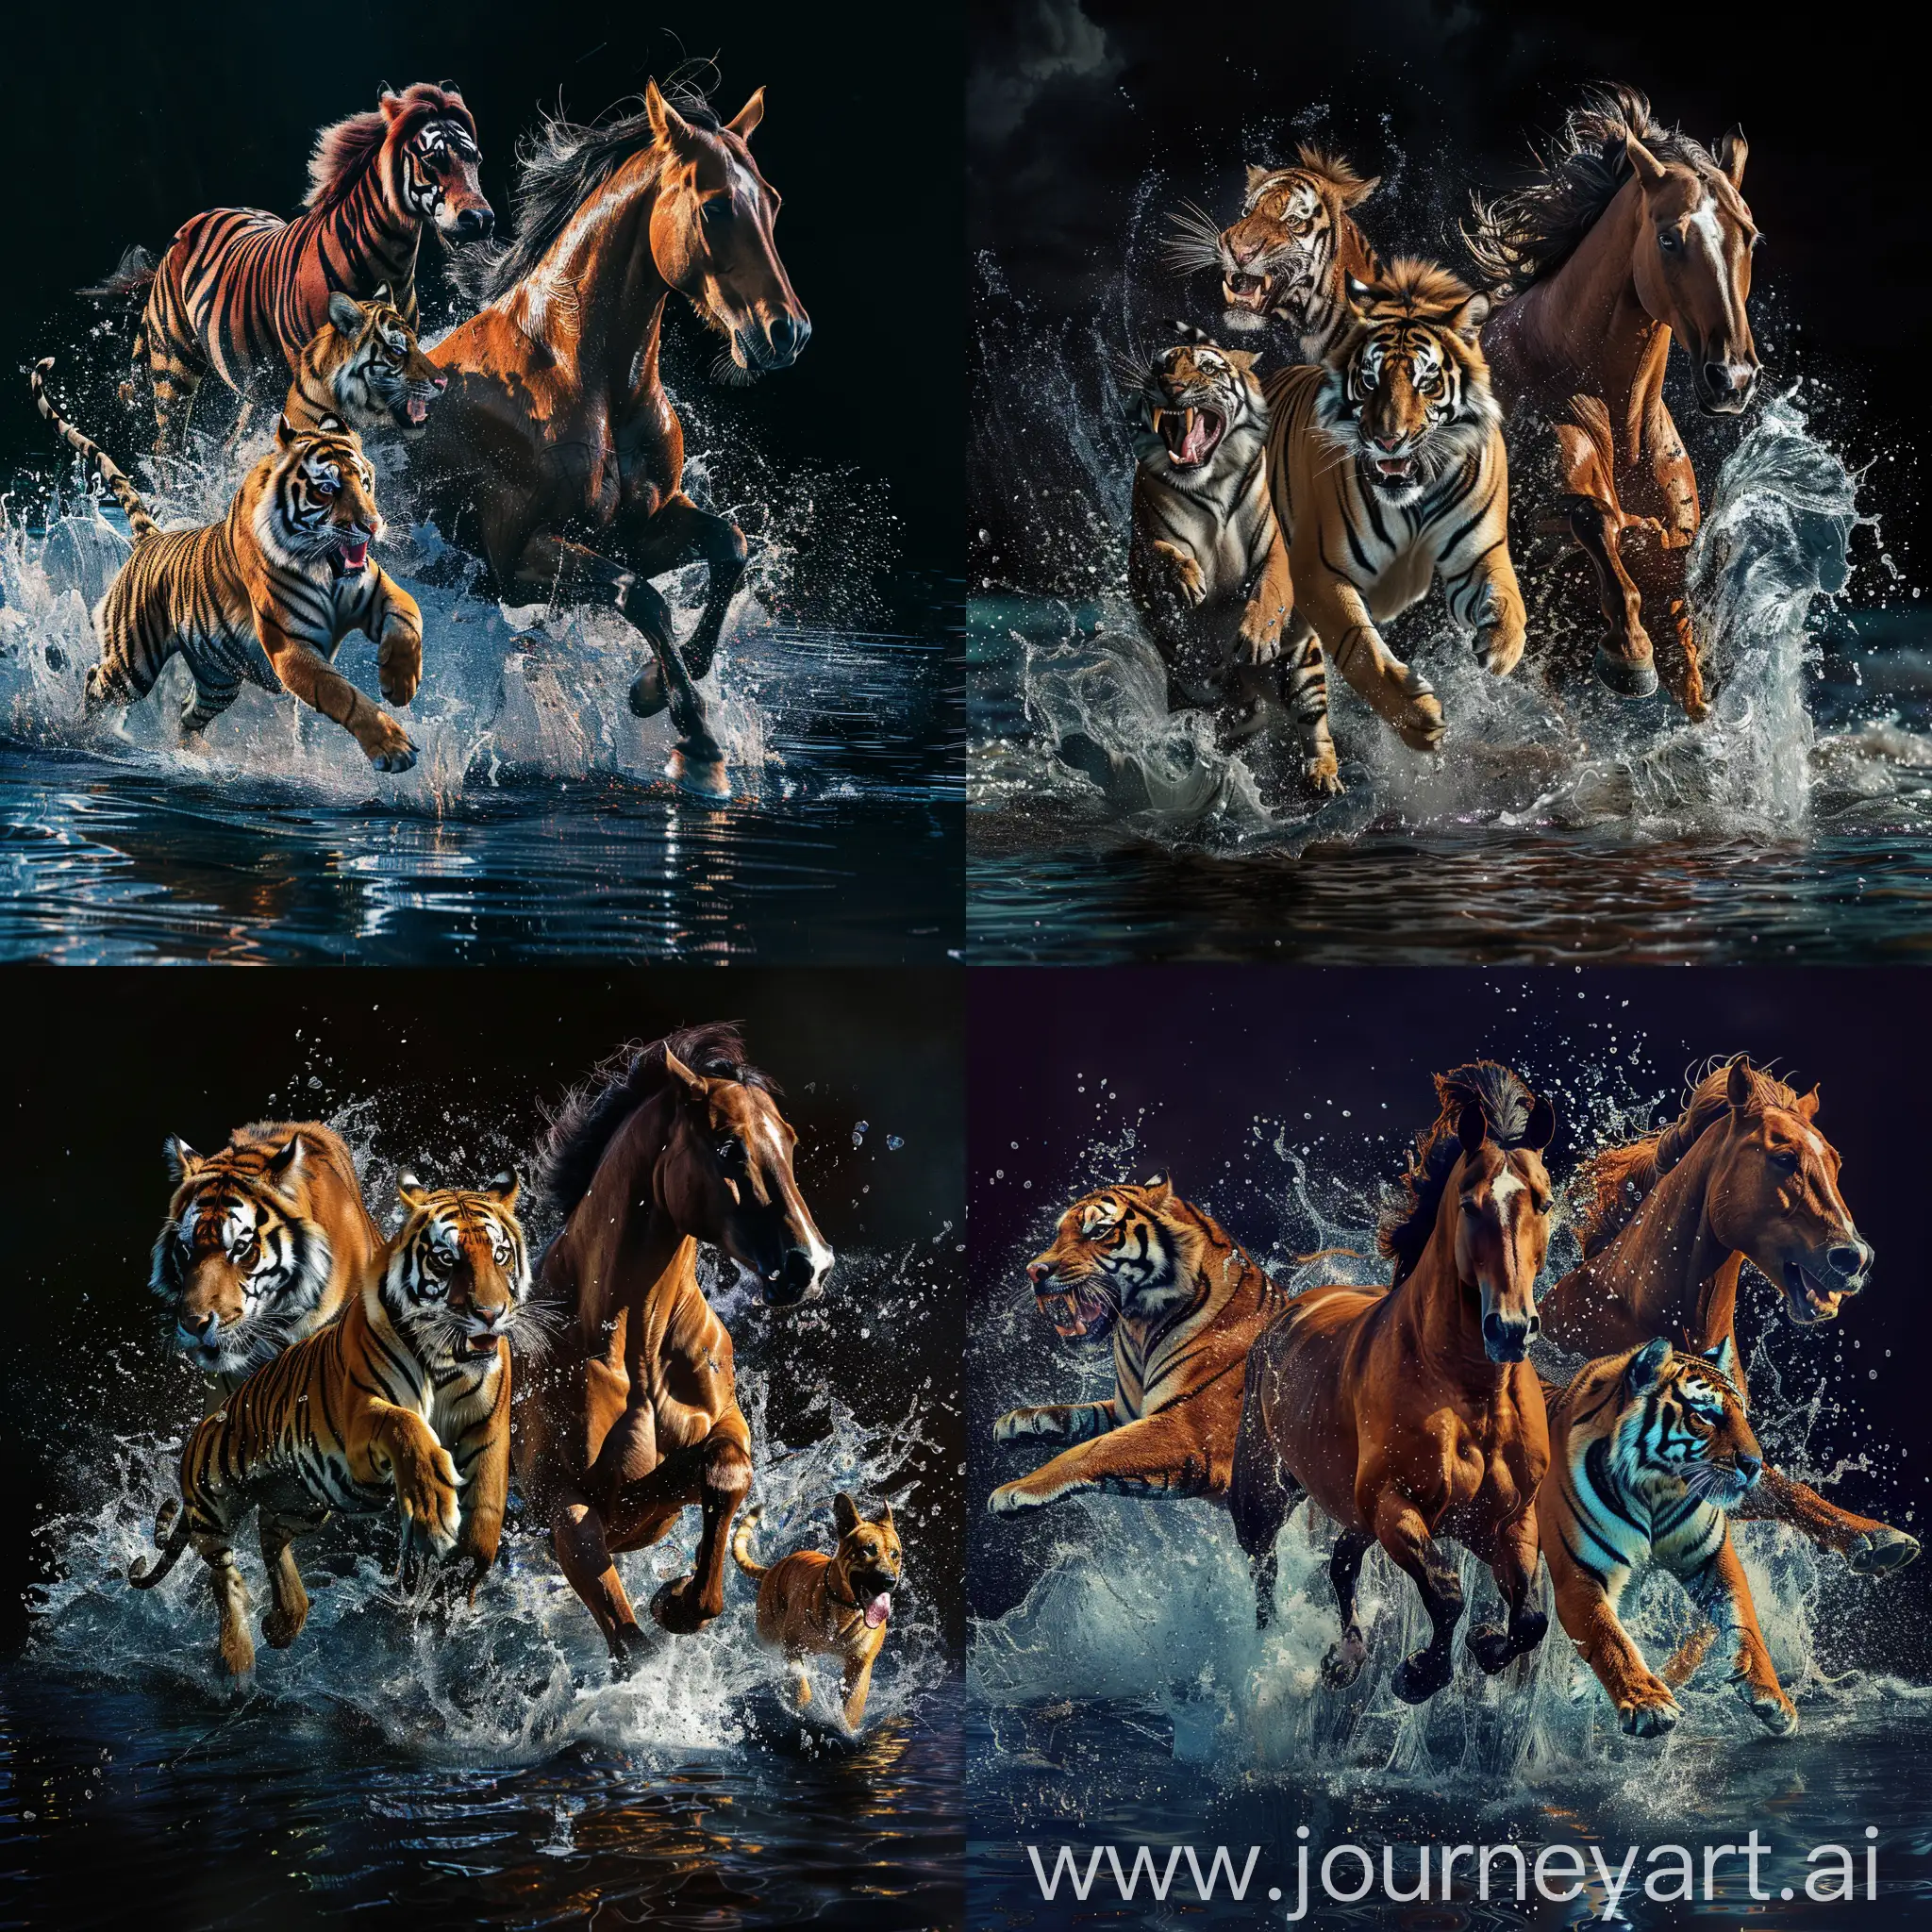 Dynamic-Animal-Trio-Horse-Tiger-and-Dog-Running-on-Water-with-Splashes